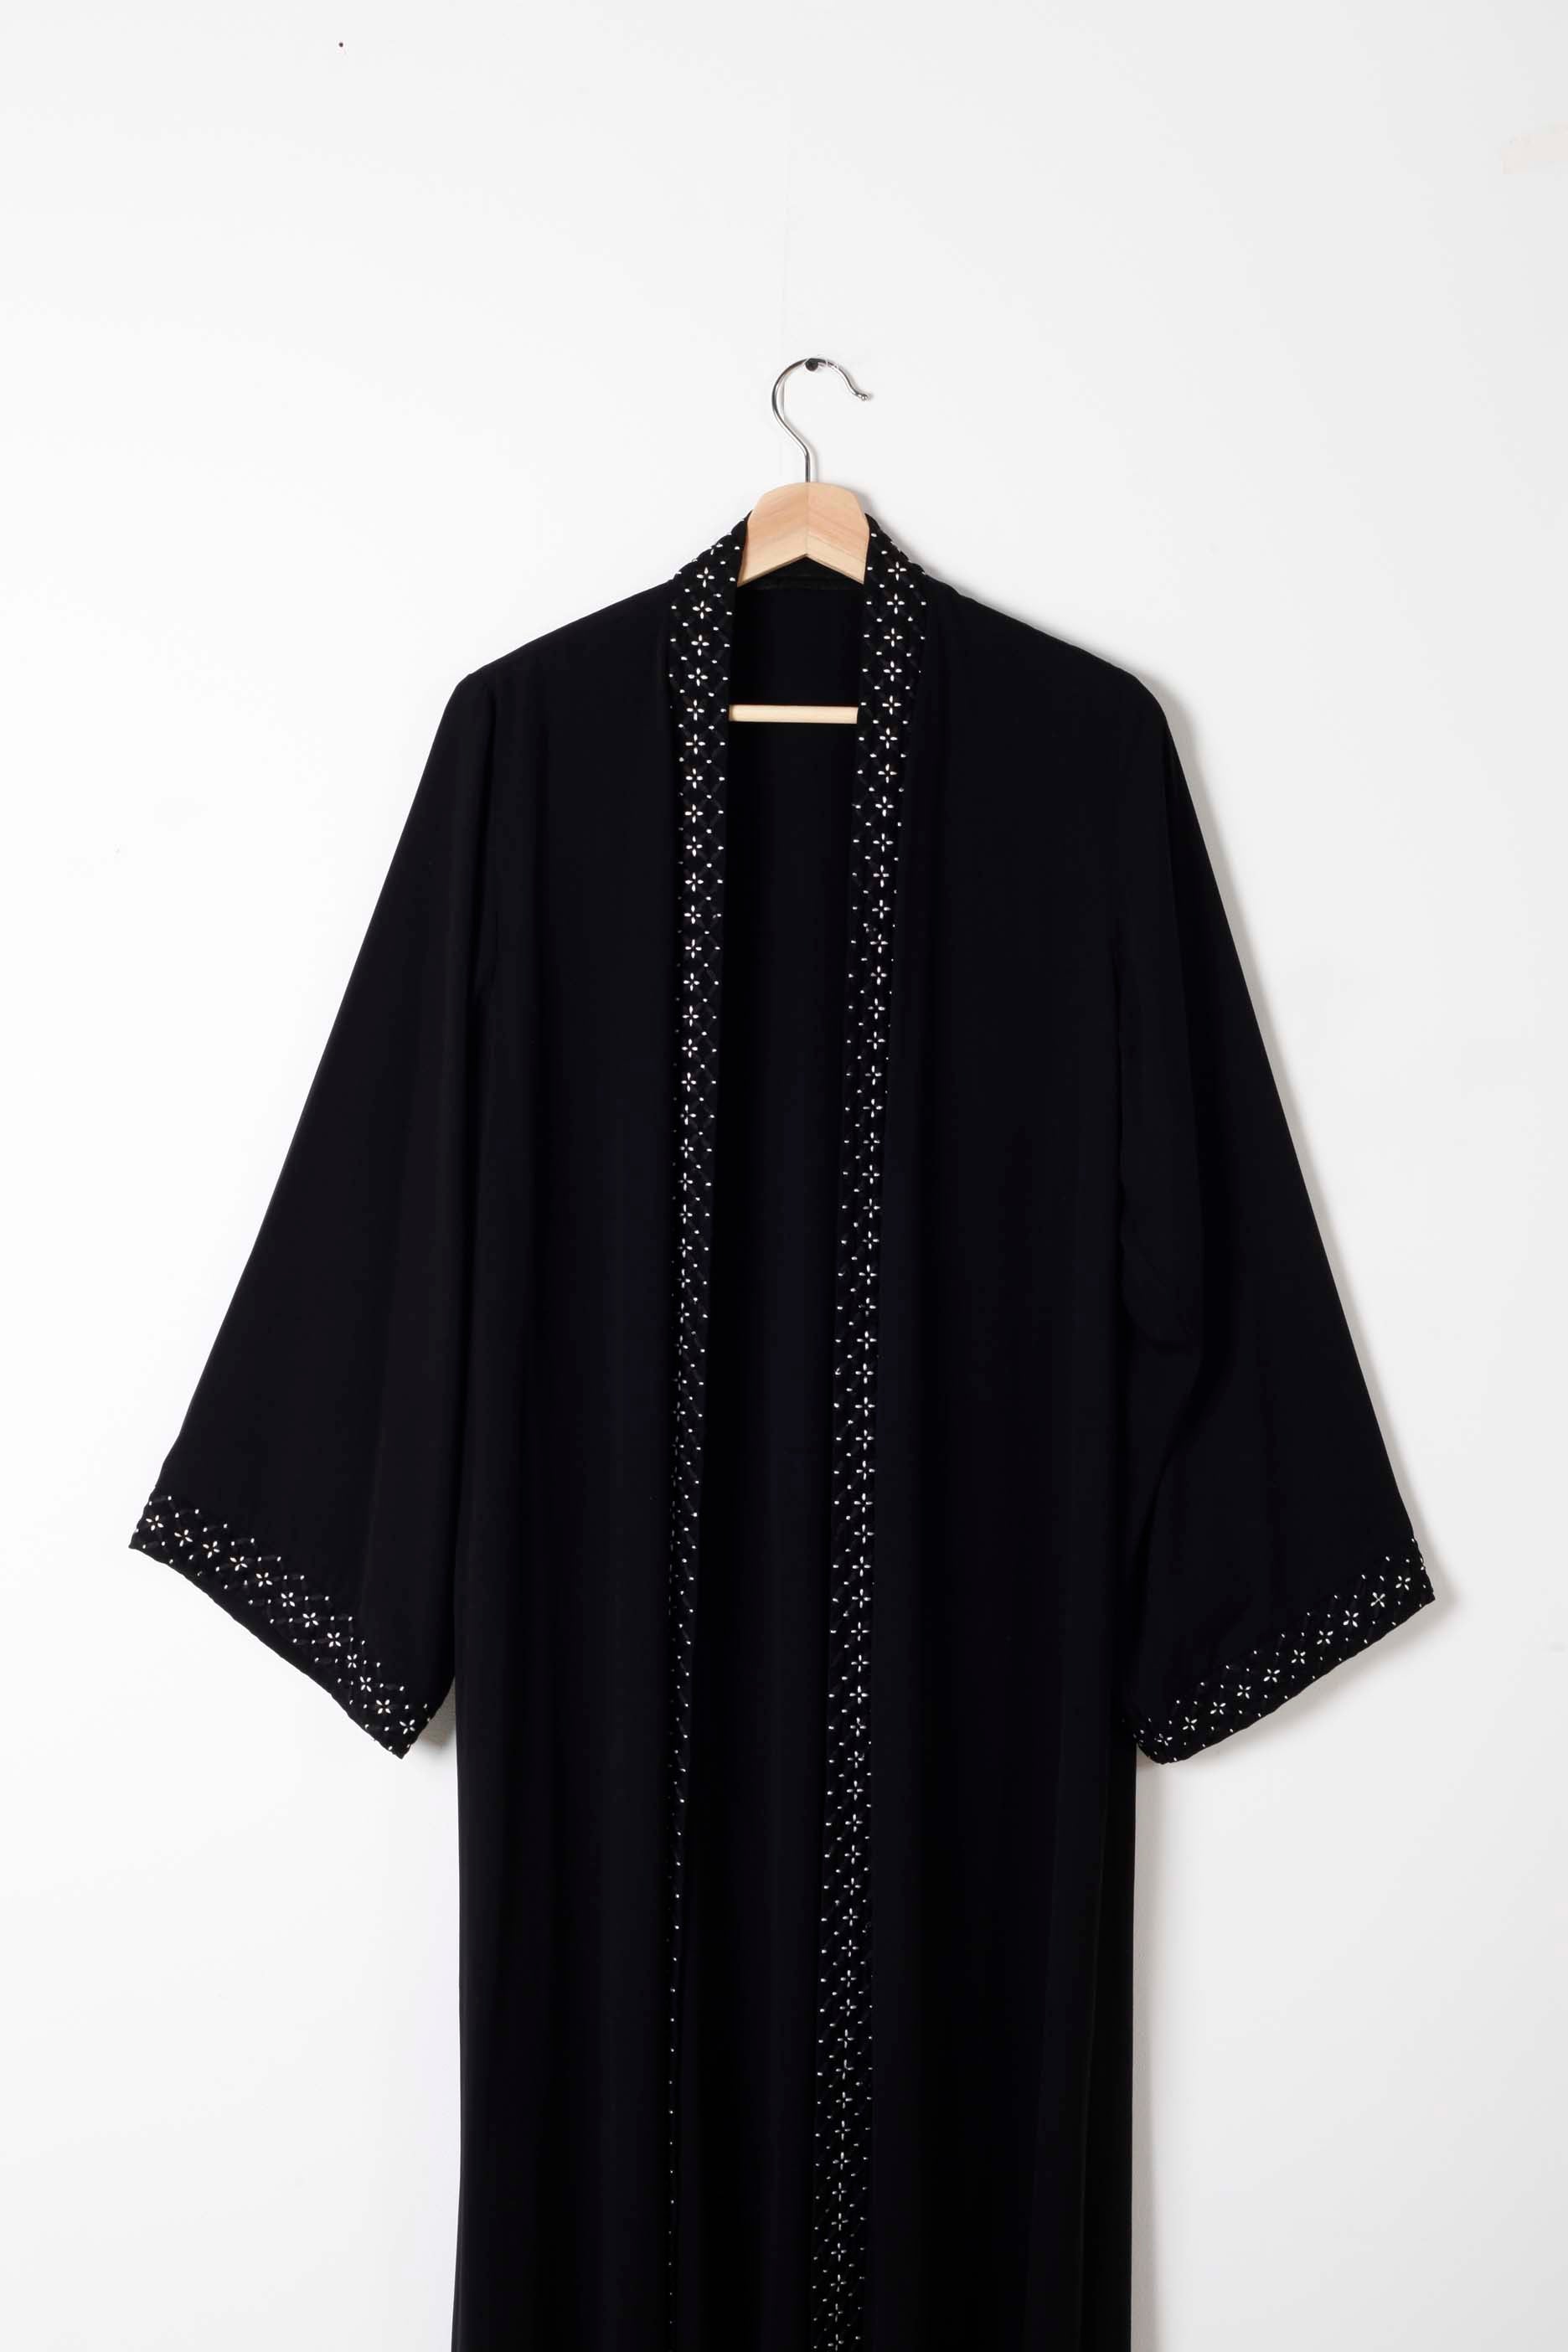 Black Abaya with White Embroidery Flowers